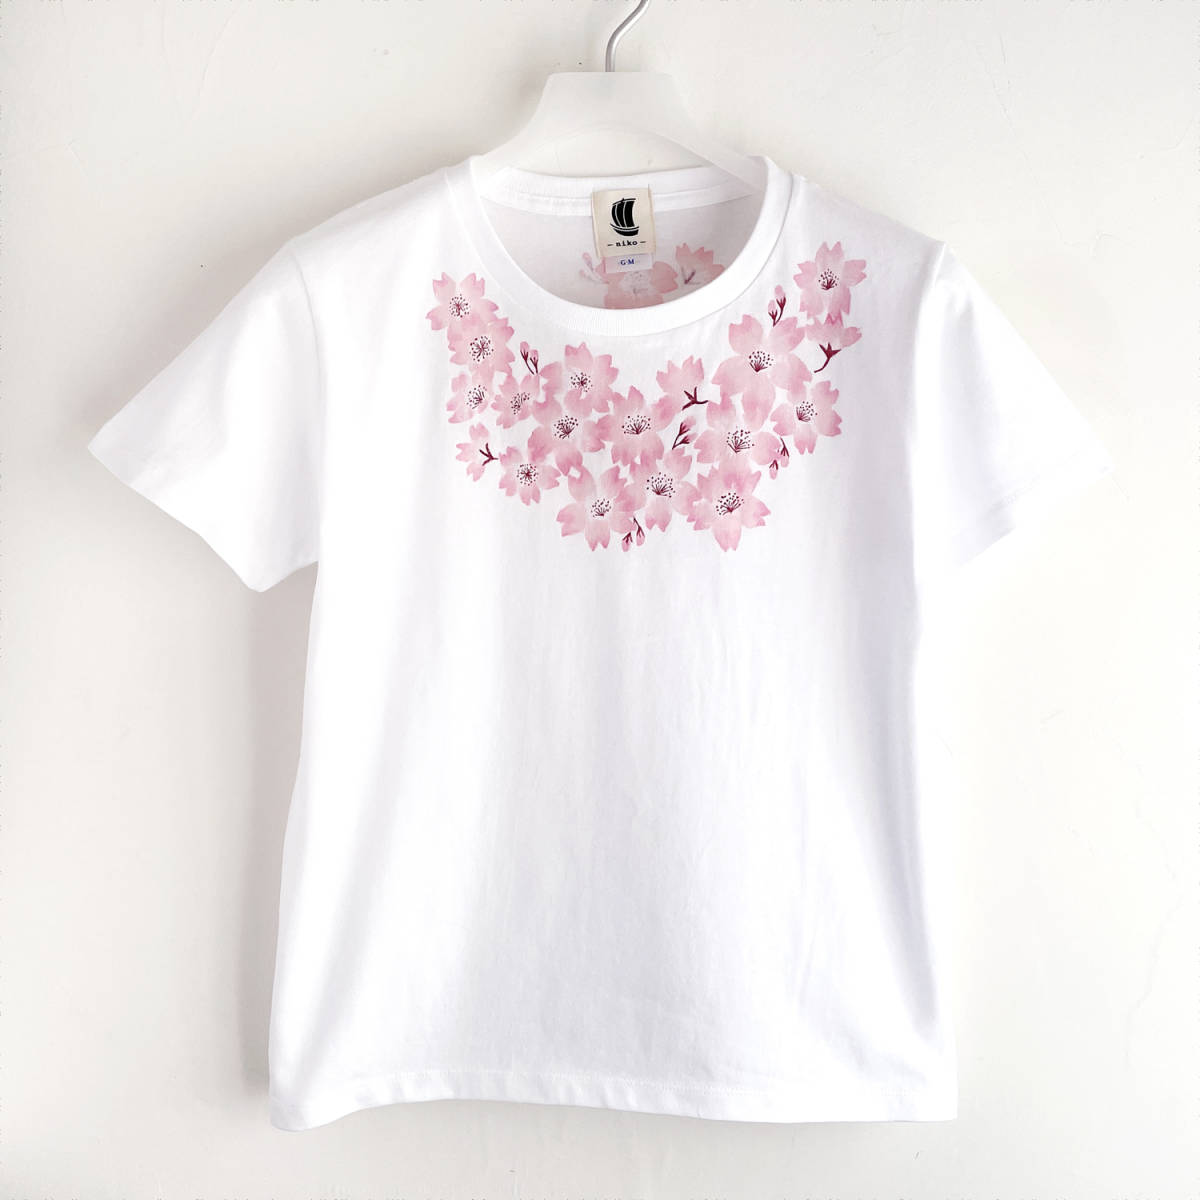 Women's T-shirt, L size, white, corsage cherry blossom pattern T-shirt, hand-painted T-shirt, L size, round neck, patterned